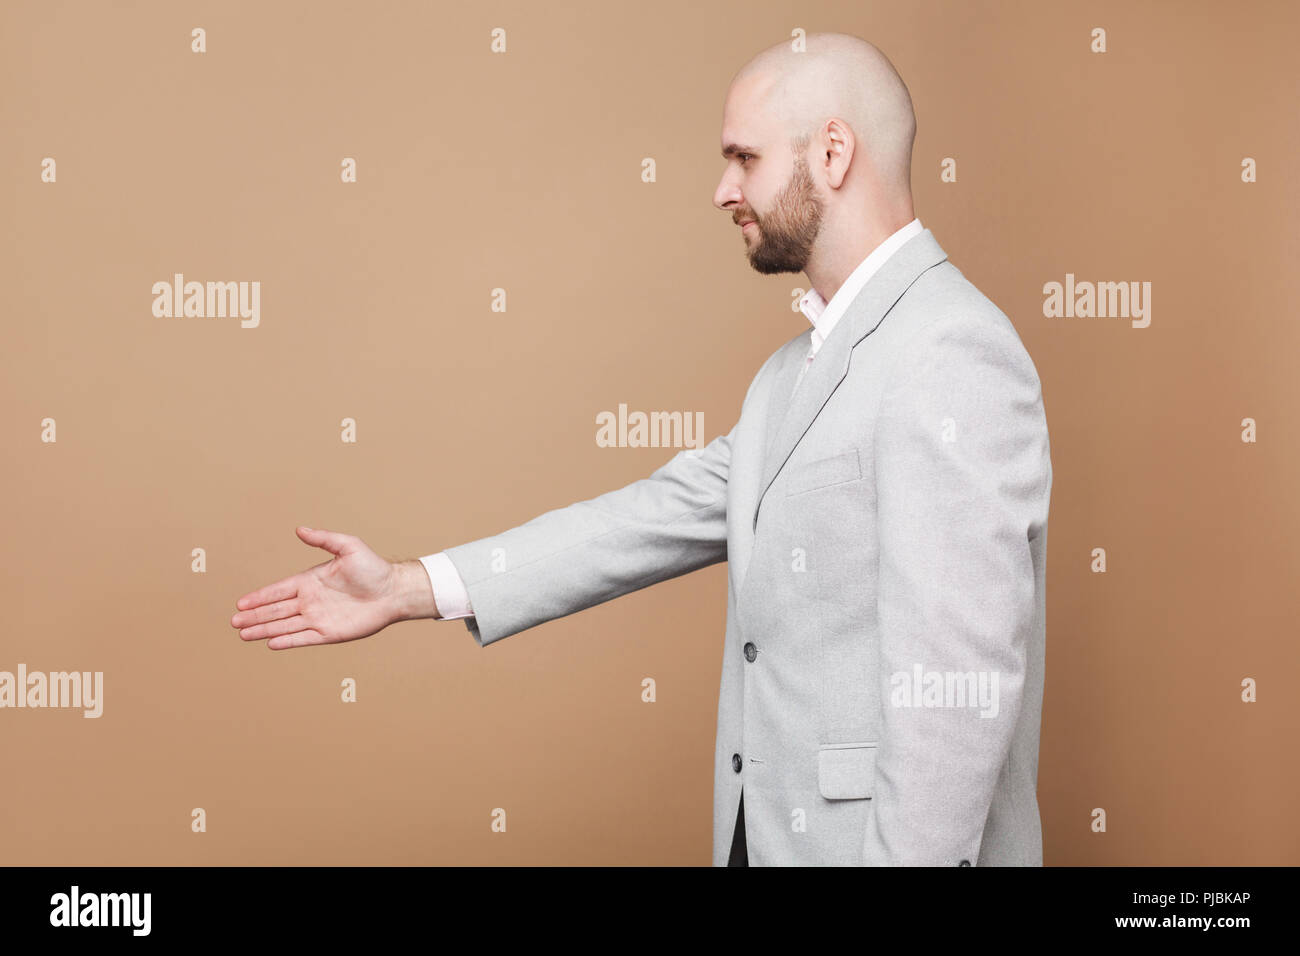 Hand shake and greeting. Profile side view portrait of middle aged bald bearded businessman in light gray suit standing and giving hand. indoor studio Stock Photo